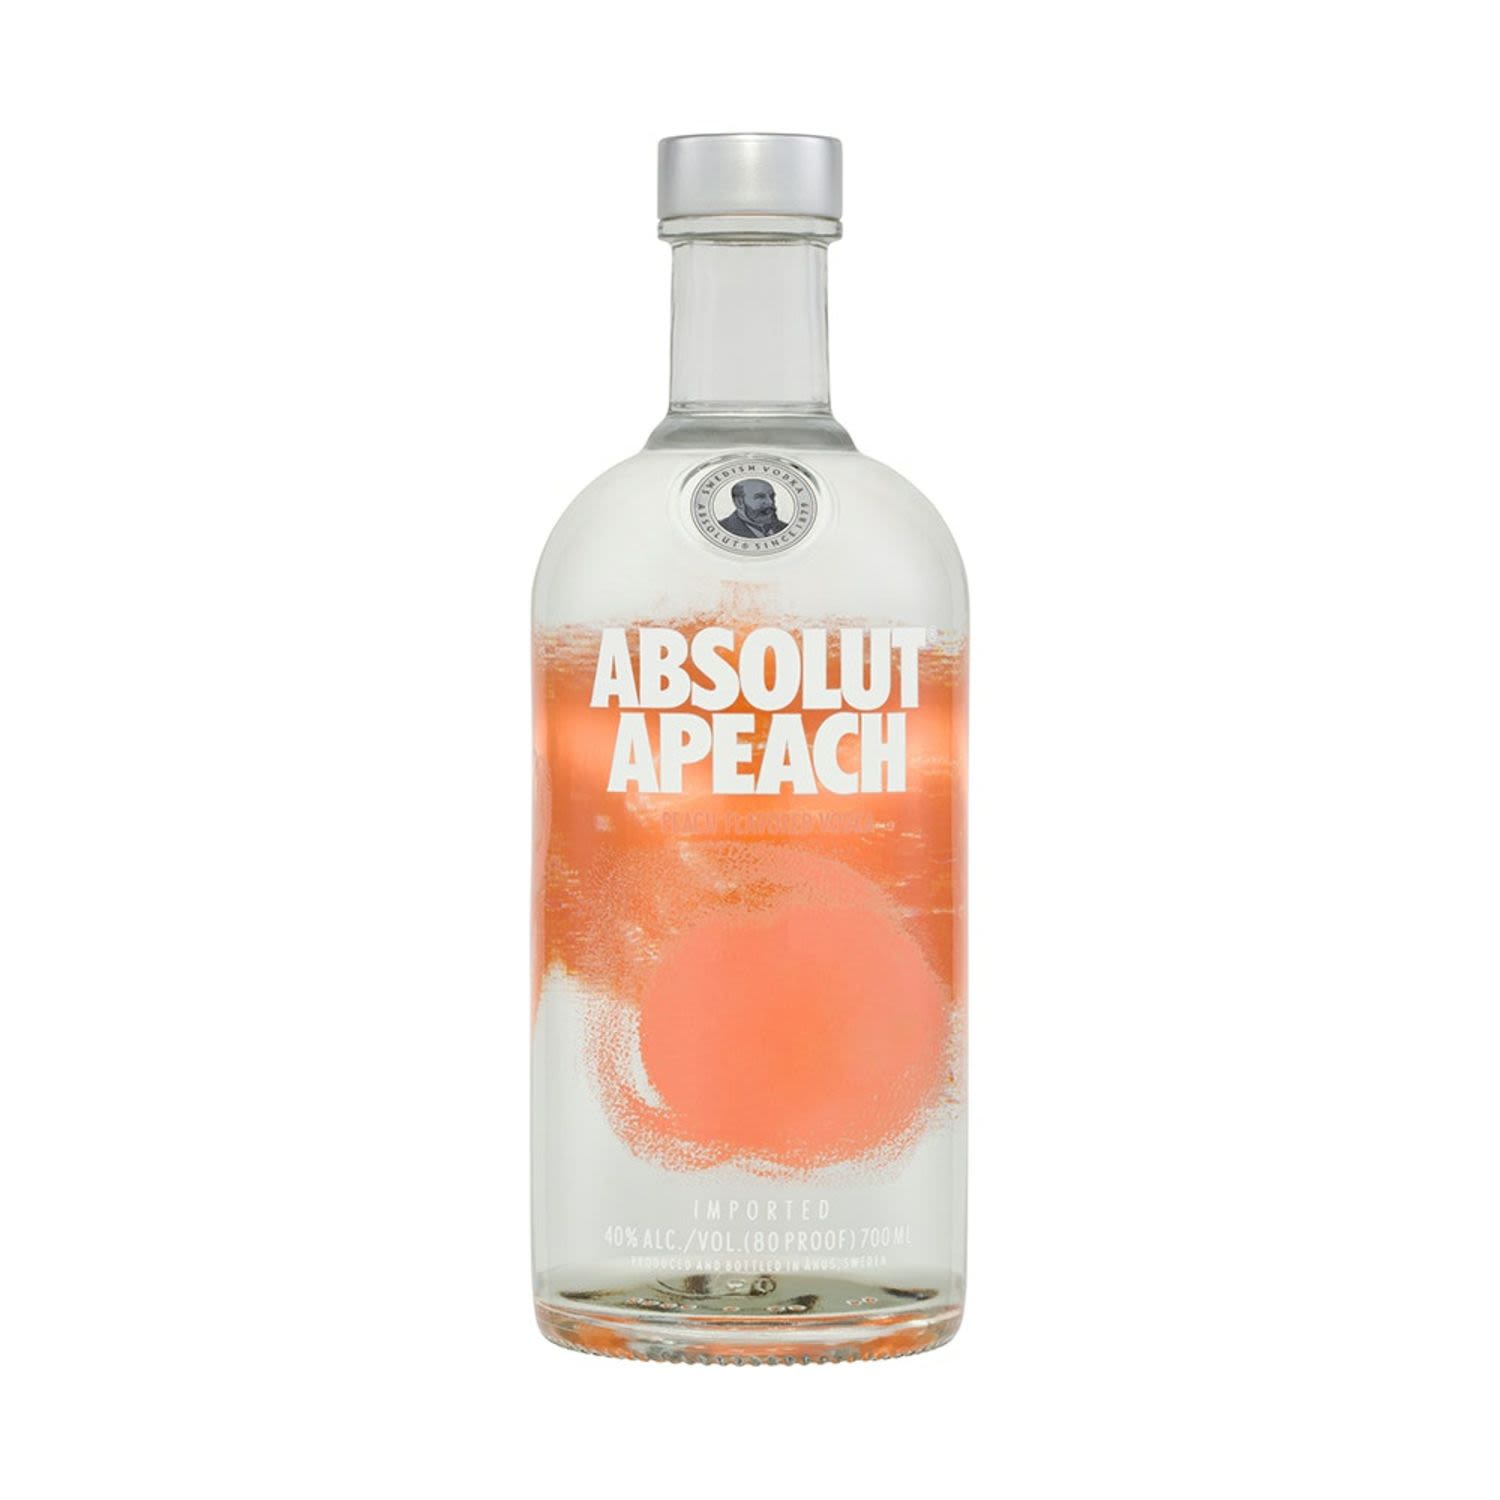 Related to cherries and apricots, the peach is loved for its fuzzy skin and sweet taste. But, as beautiful as it is, peaches occur too seldom in drinks. So, we made Absolut Apeach back in 2005 to change that and it soon found its following around the world. Absolut Apeach is the true master of one (ingredient that is). Add iced tea for an easy backyard barbeque drink or mix it with prosecco for a fancy Apeach Bellini at your next rooftop party. Et voilà!<br /> <br />Alcohol Volume: 40.00%<br /><br />Pack Format: Bottle<br /><br />Standard Drinks: 22</br /><br />Pack Type: Bottle<br /><br />Country of Origin: Sweden<br />